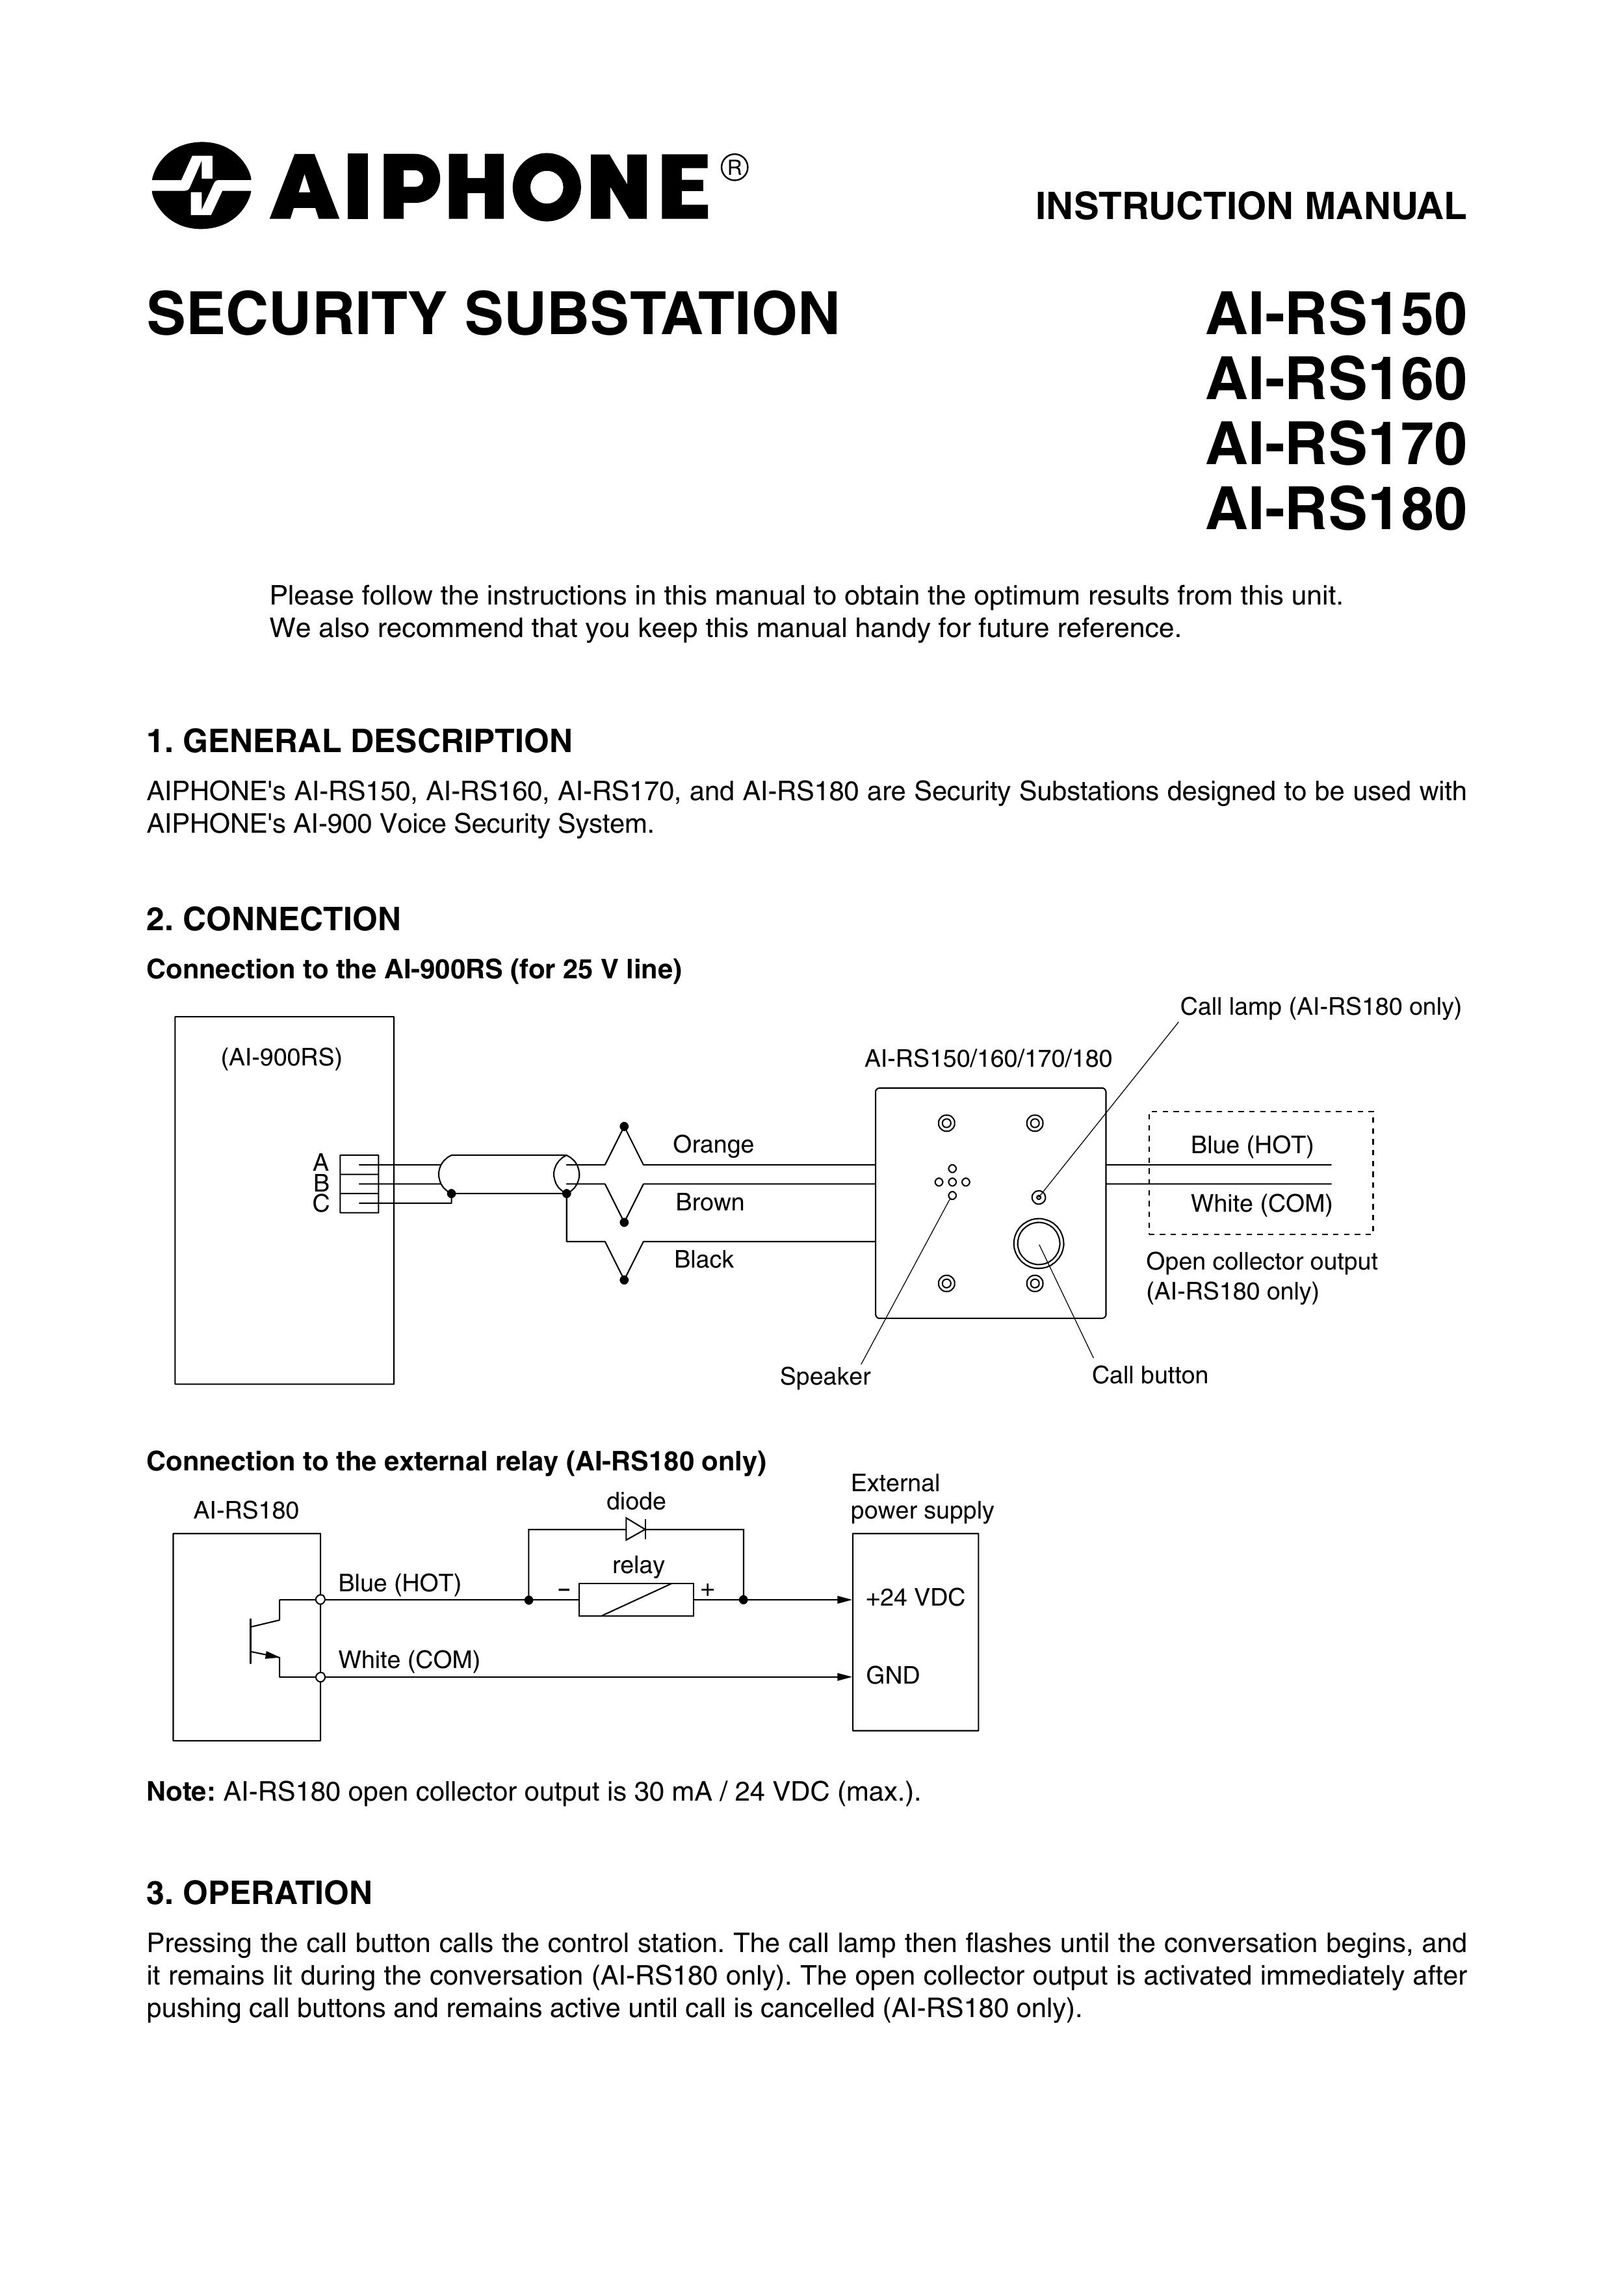 Aiphone AI-RS180 Home Security System User Manual